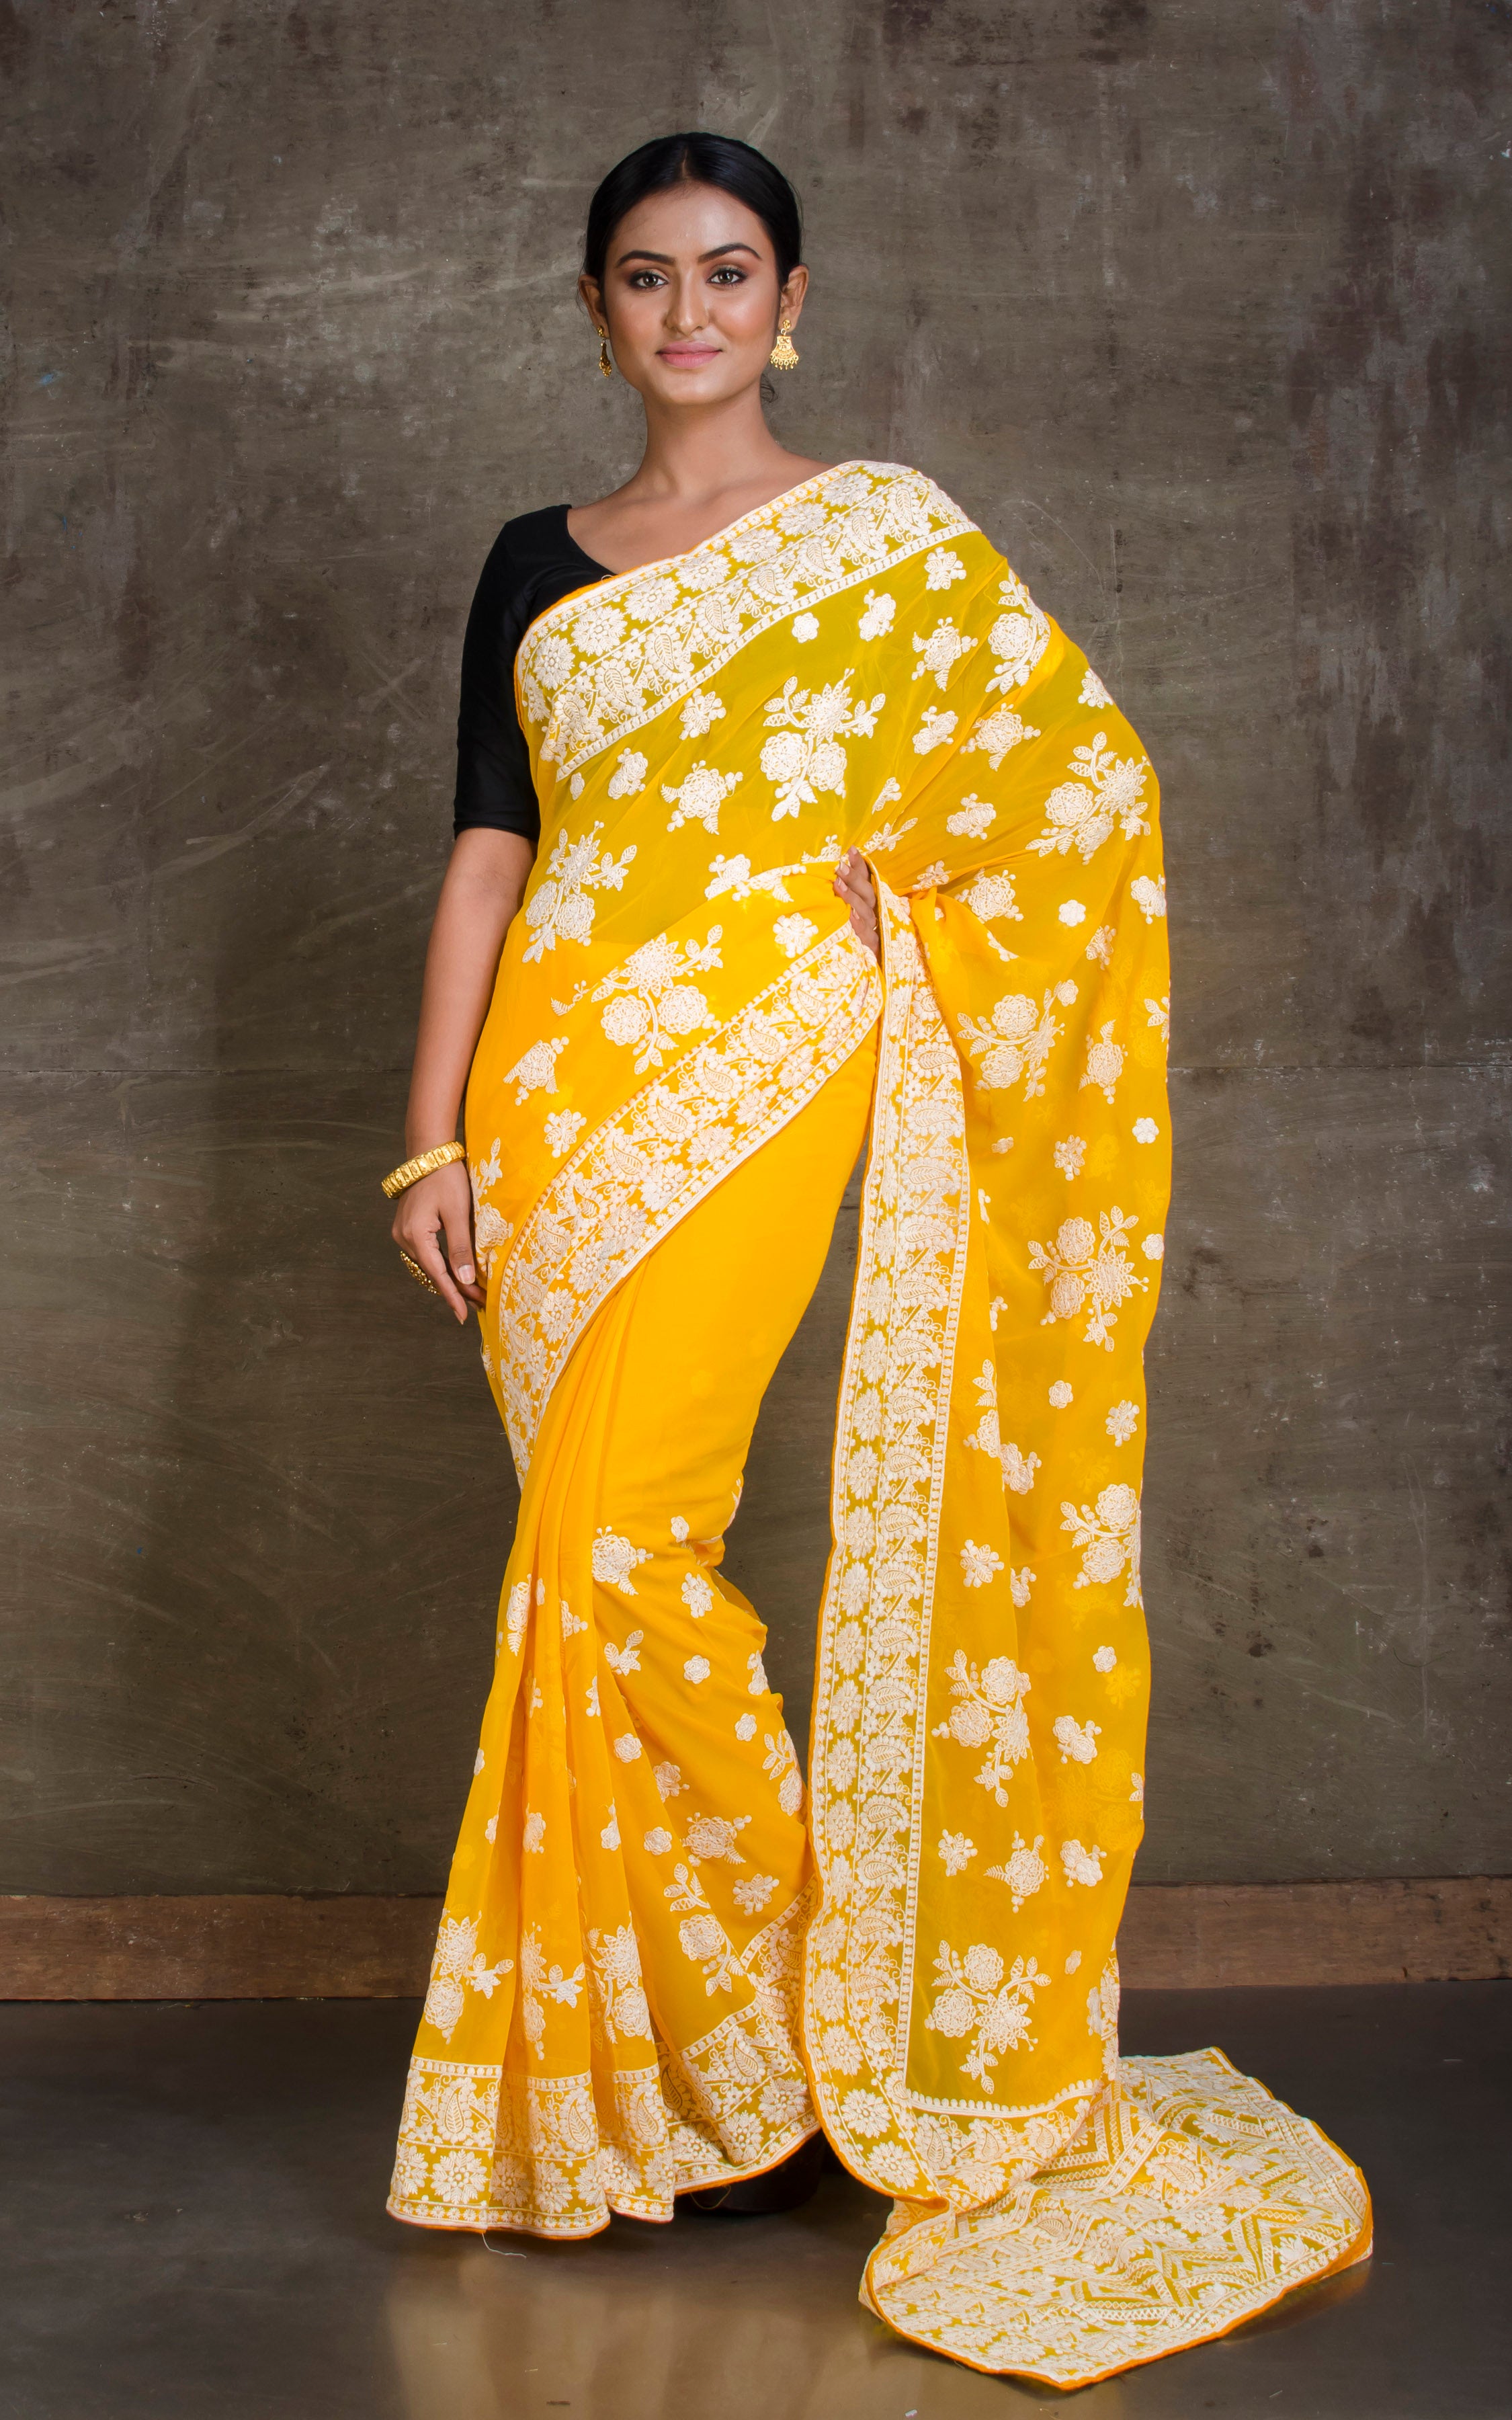 Buy Online Yellow Sarees at Low Price in India for Haldi Ceremony | Kasee  Fashion- Best Place for Yellow Sarees Online Shopping